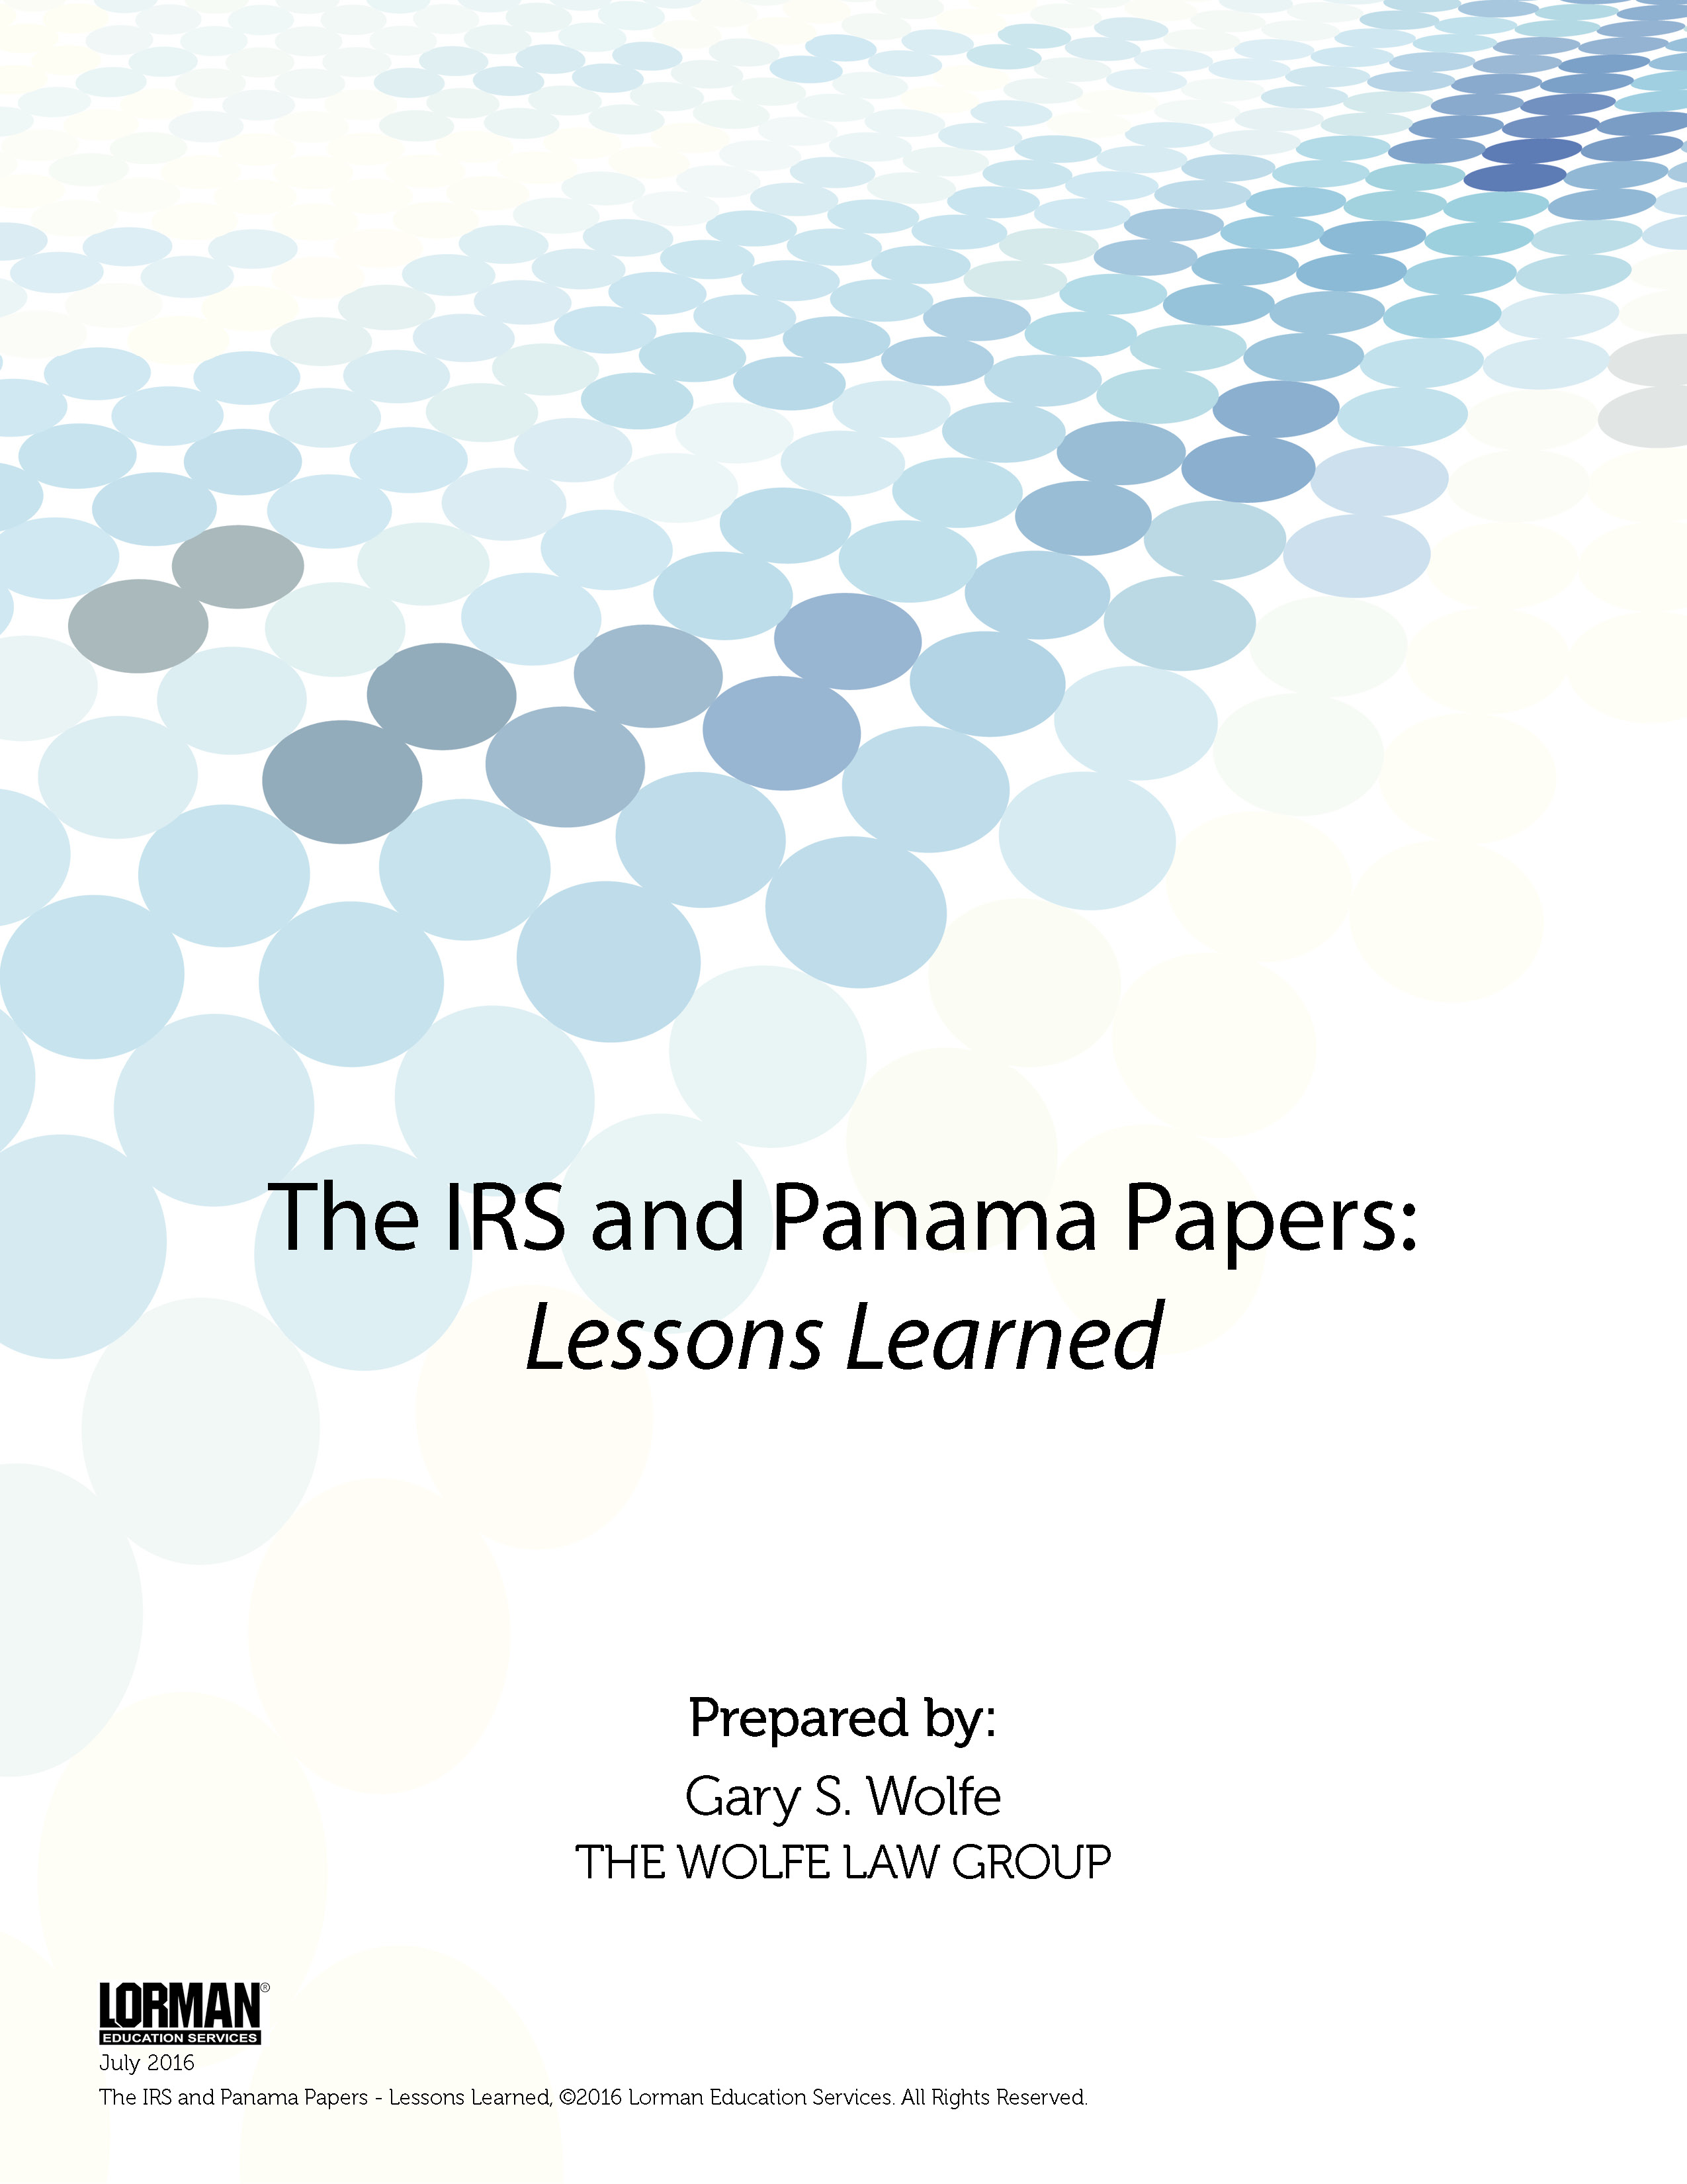 The IRS and Panama Papers - Lessons Learned